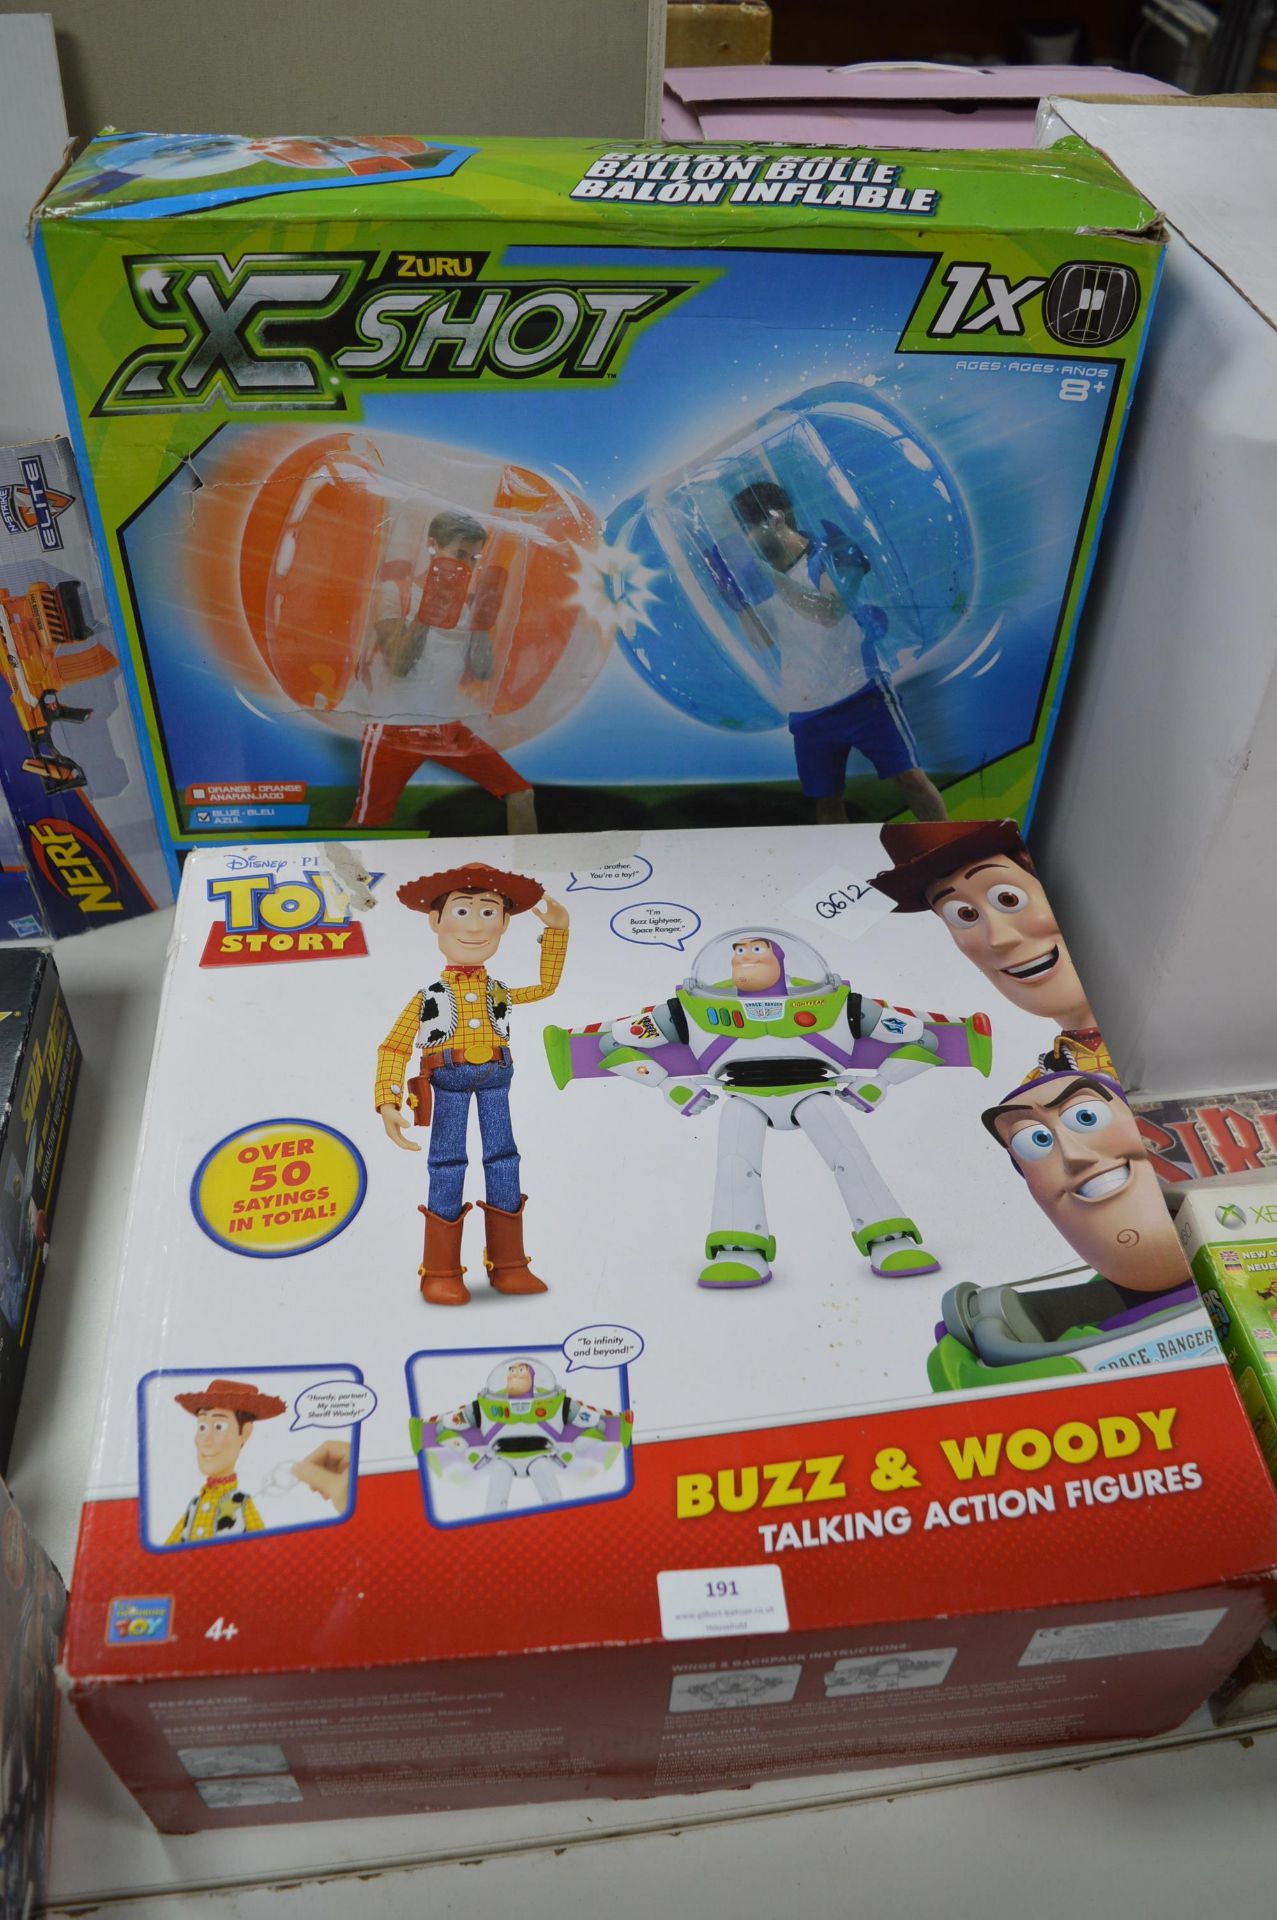 Toy Story Buzz and Woody Talking Figures, plus X-S